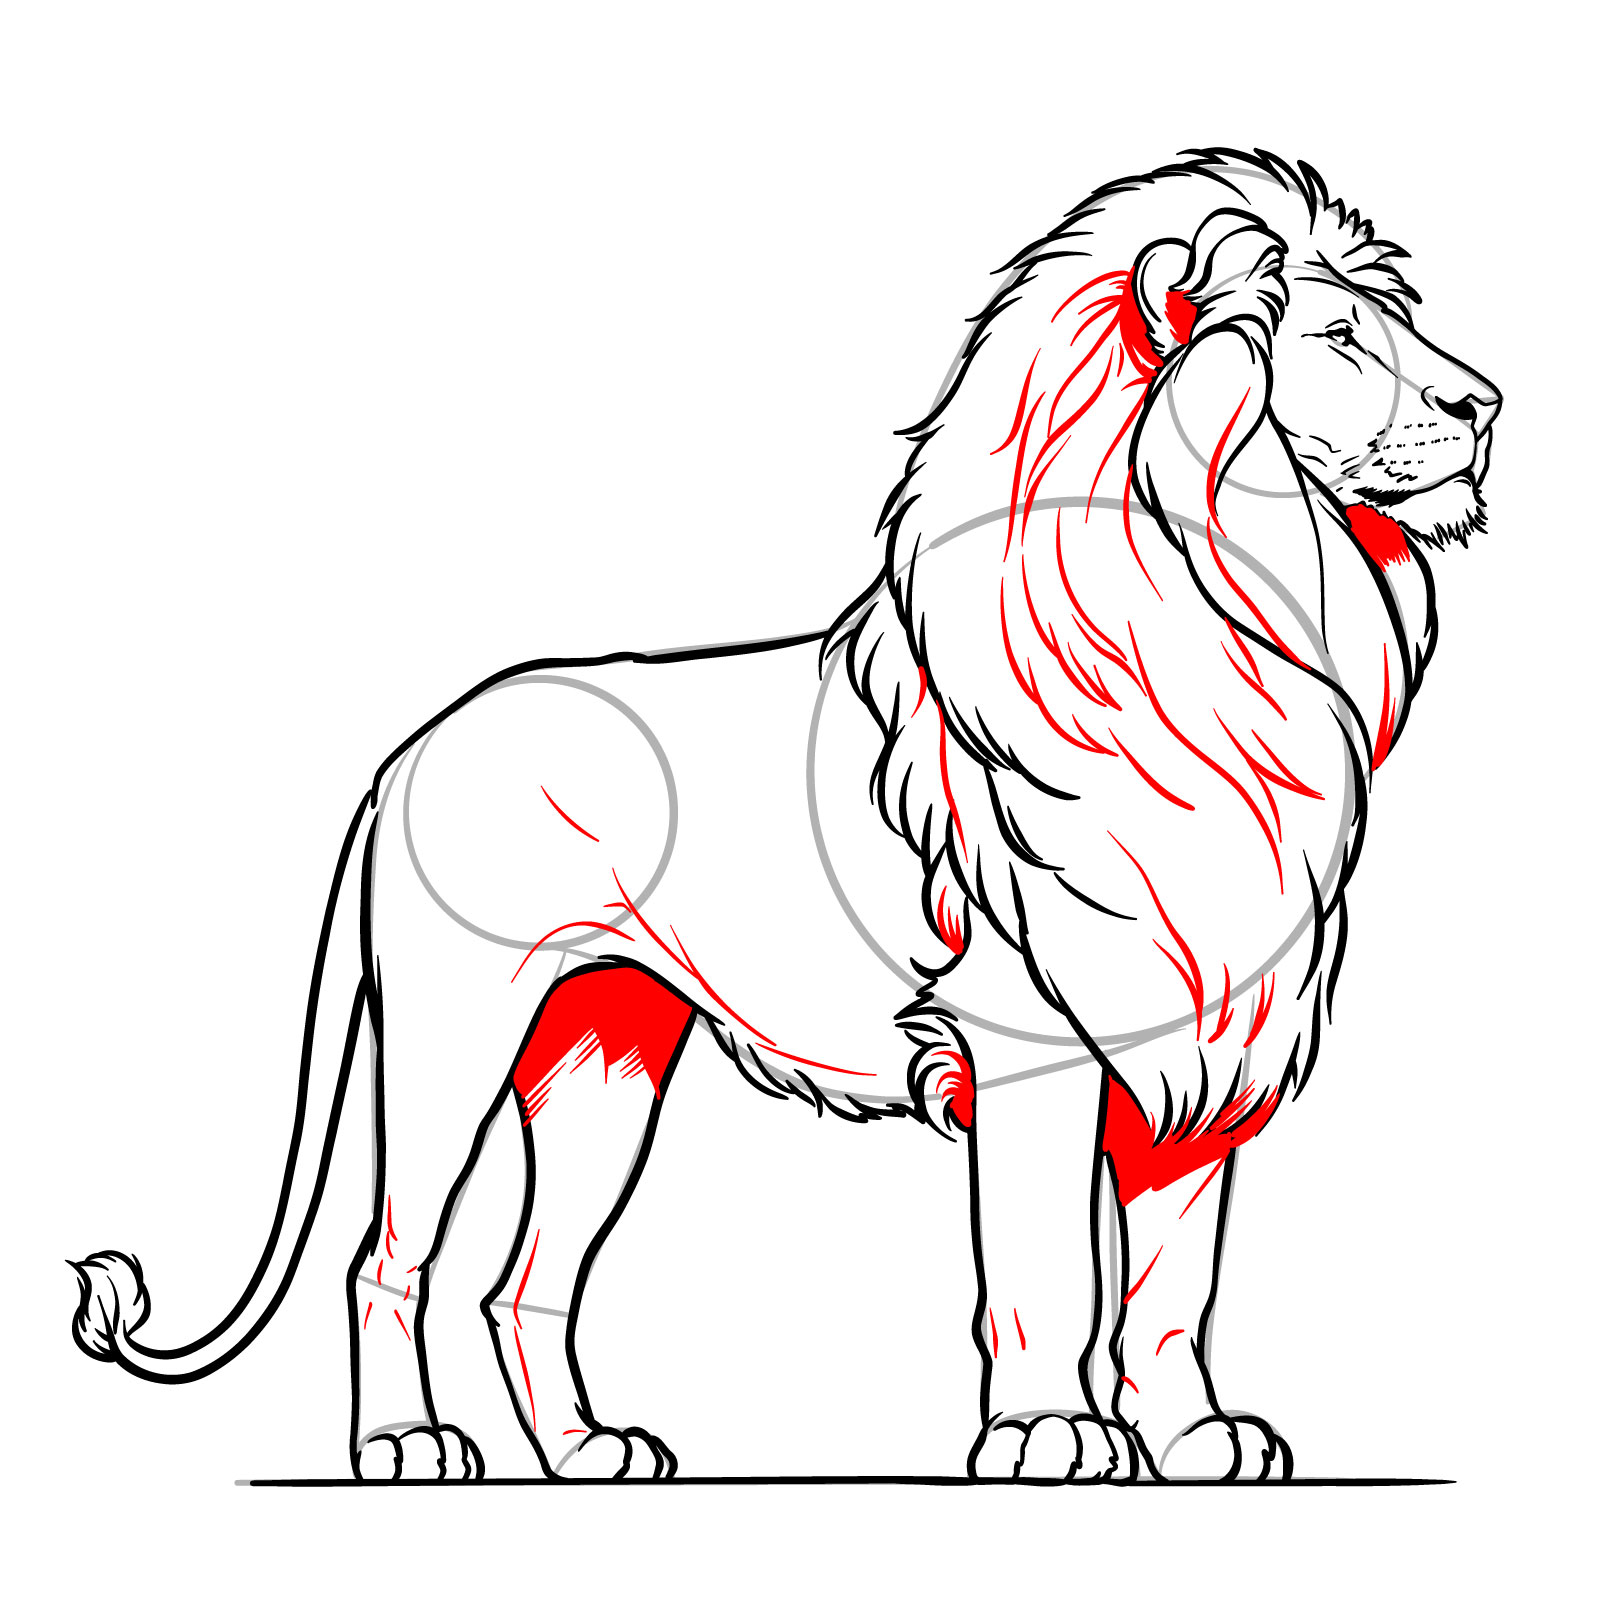 Enhancing the mane and adding body details to a standing lion - step 18